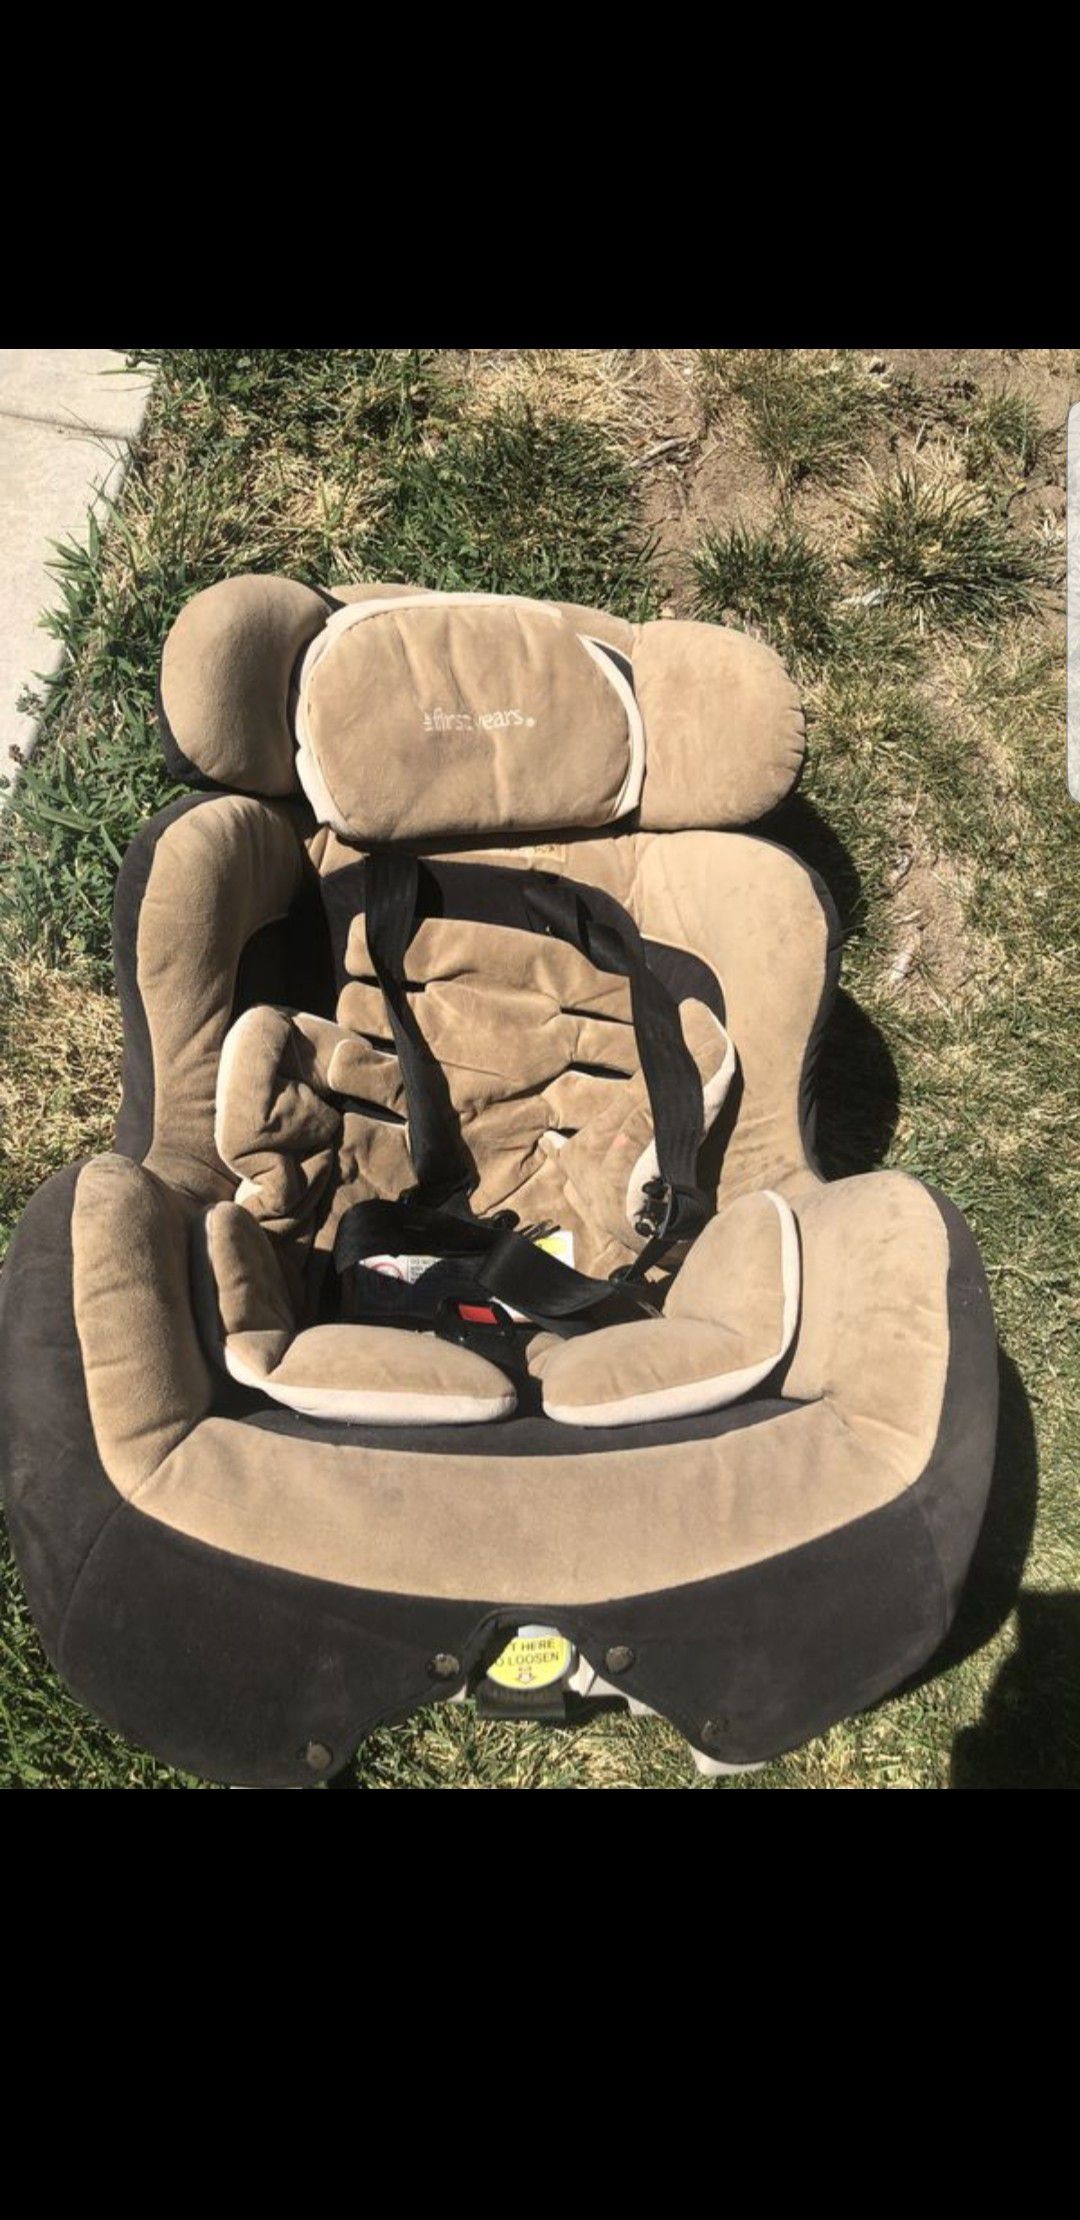 First years car seat